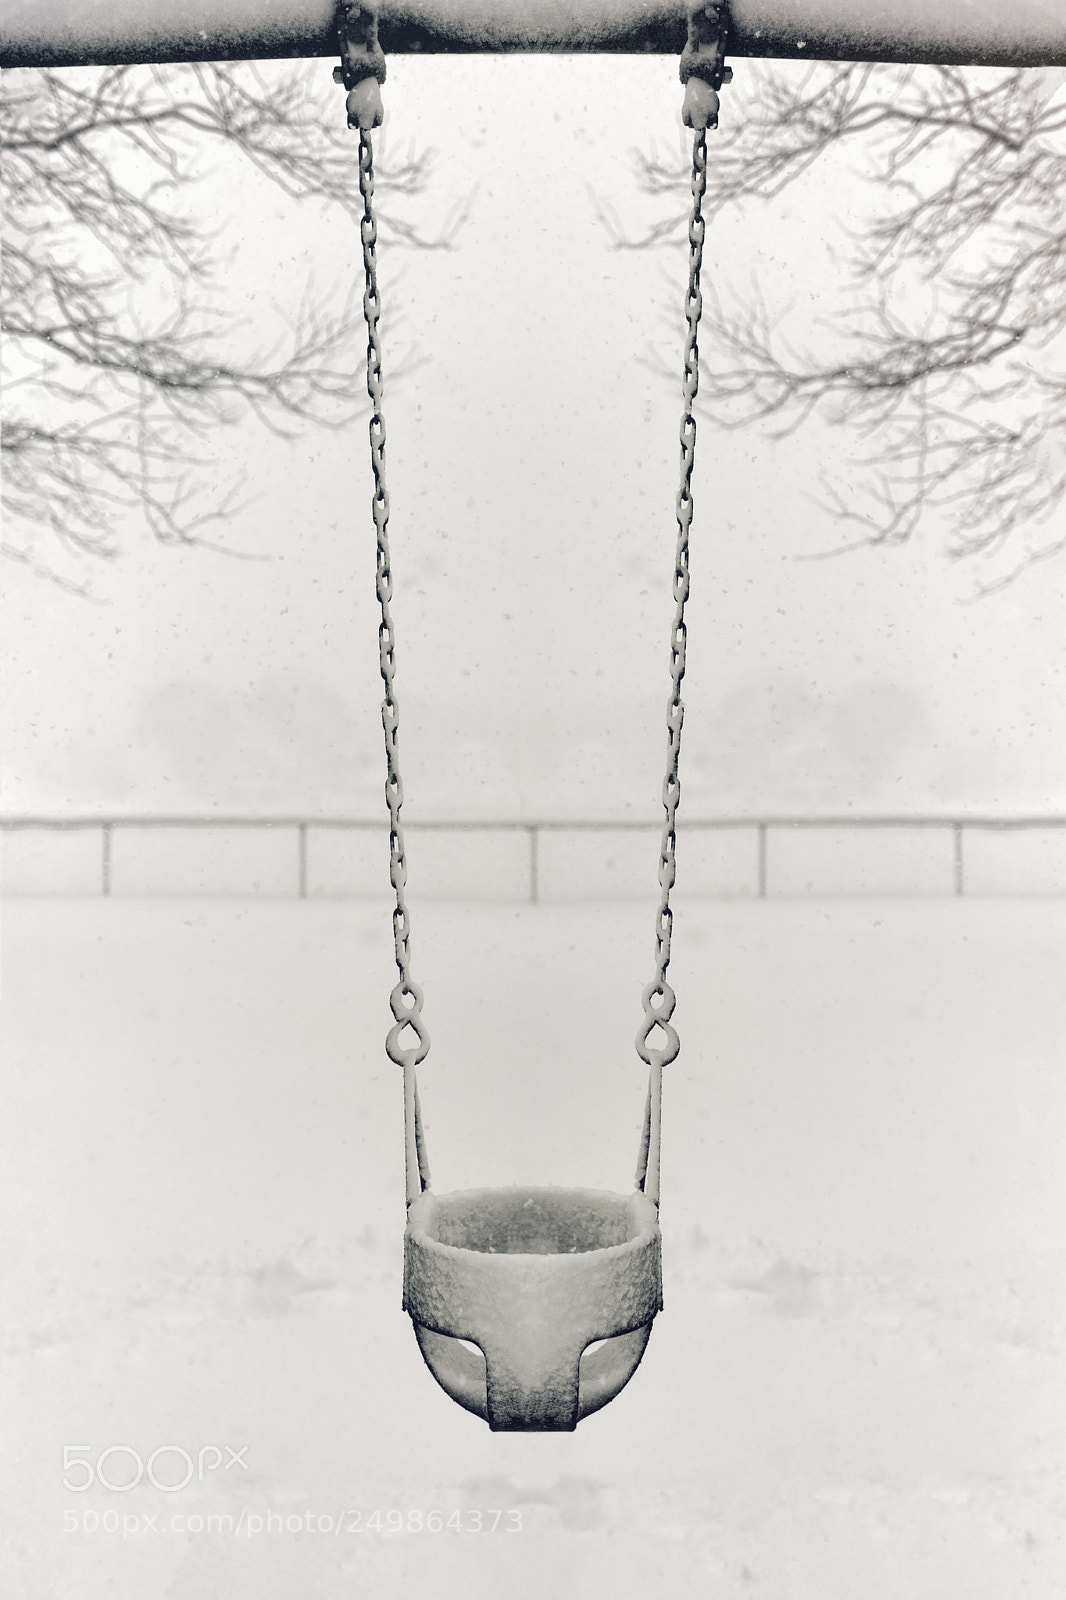 Nikon D810 sample photo. Snowy day at the photography